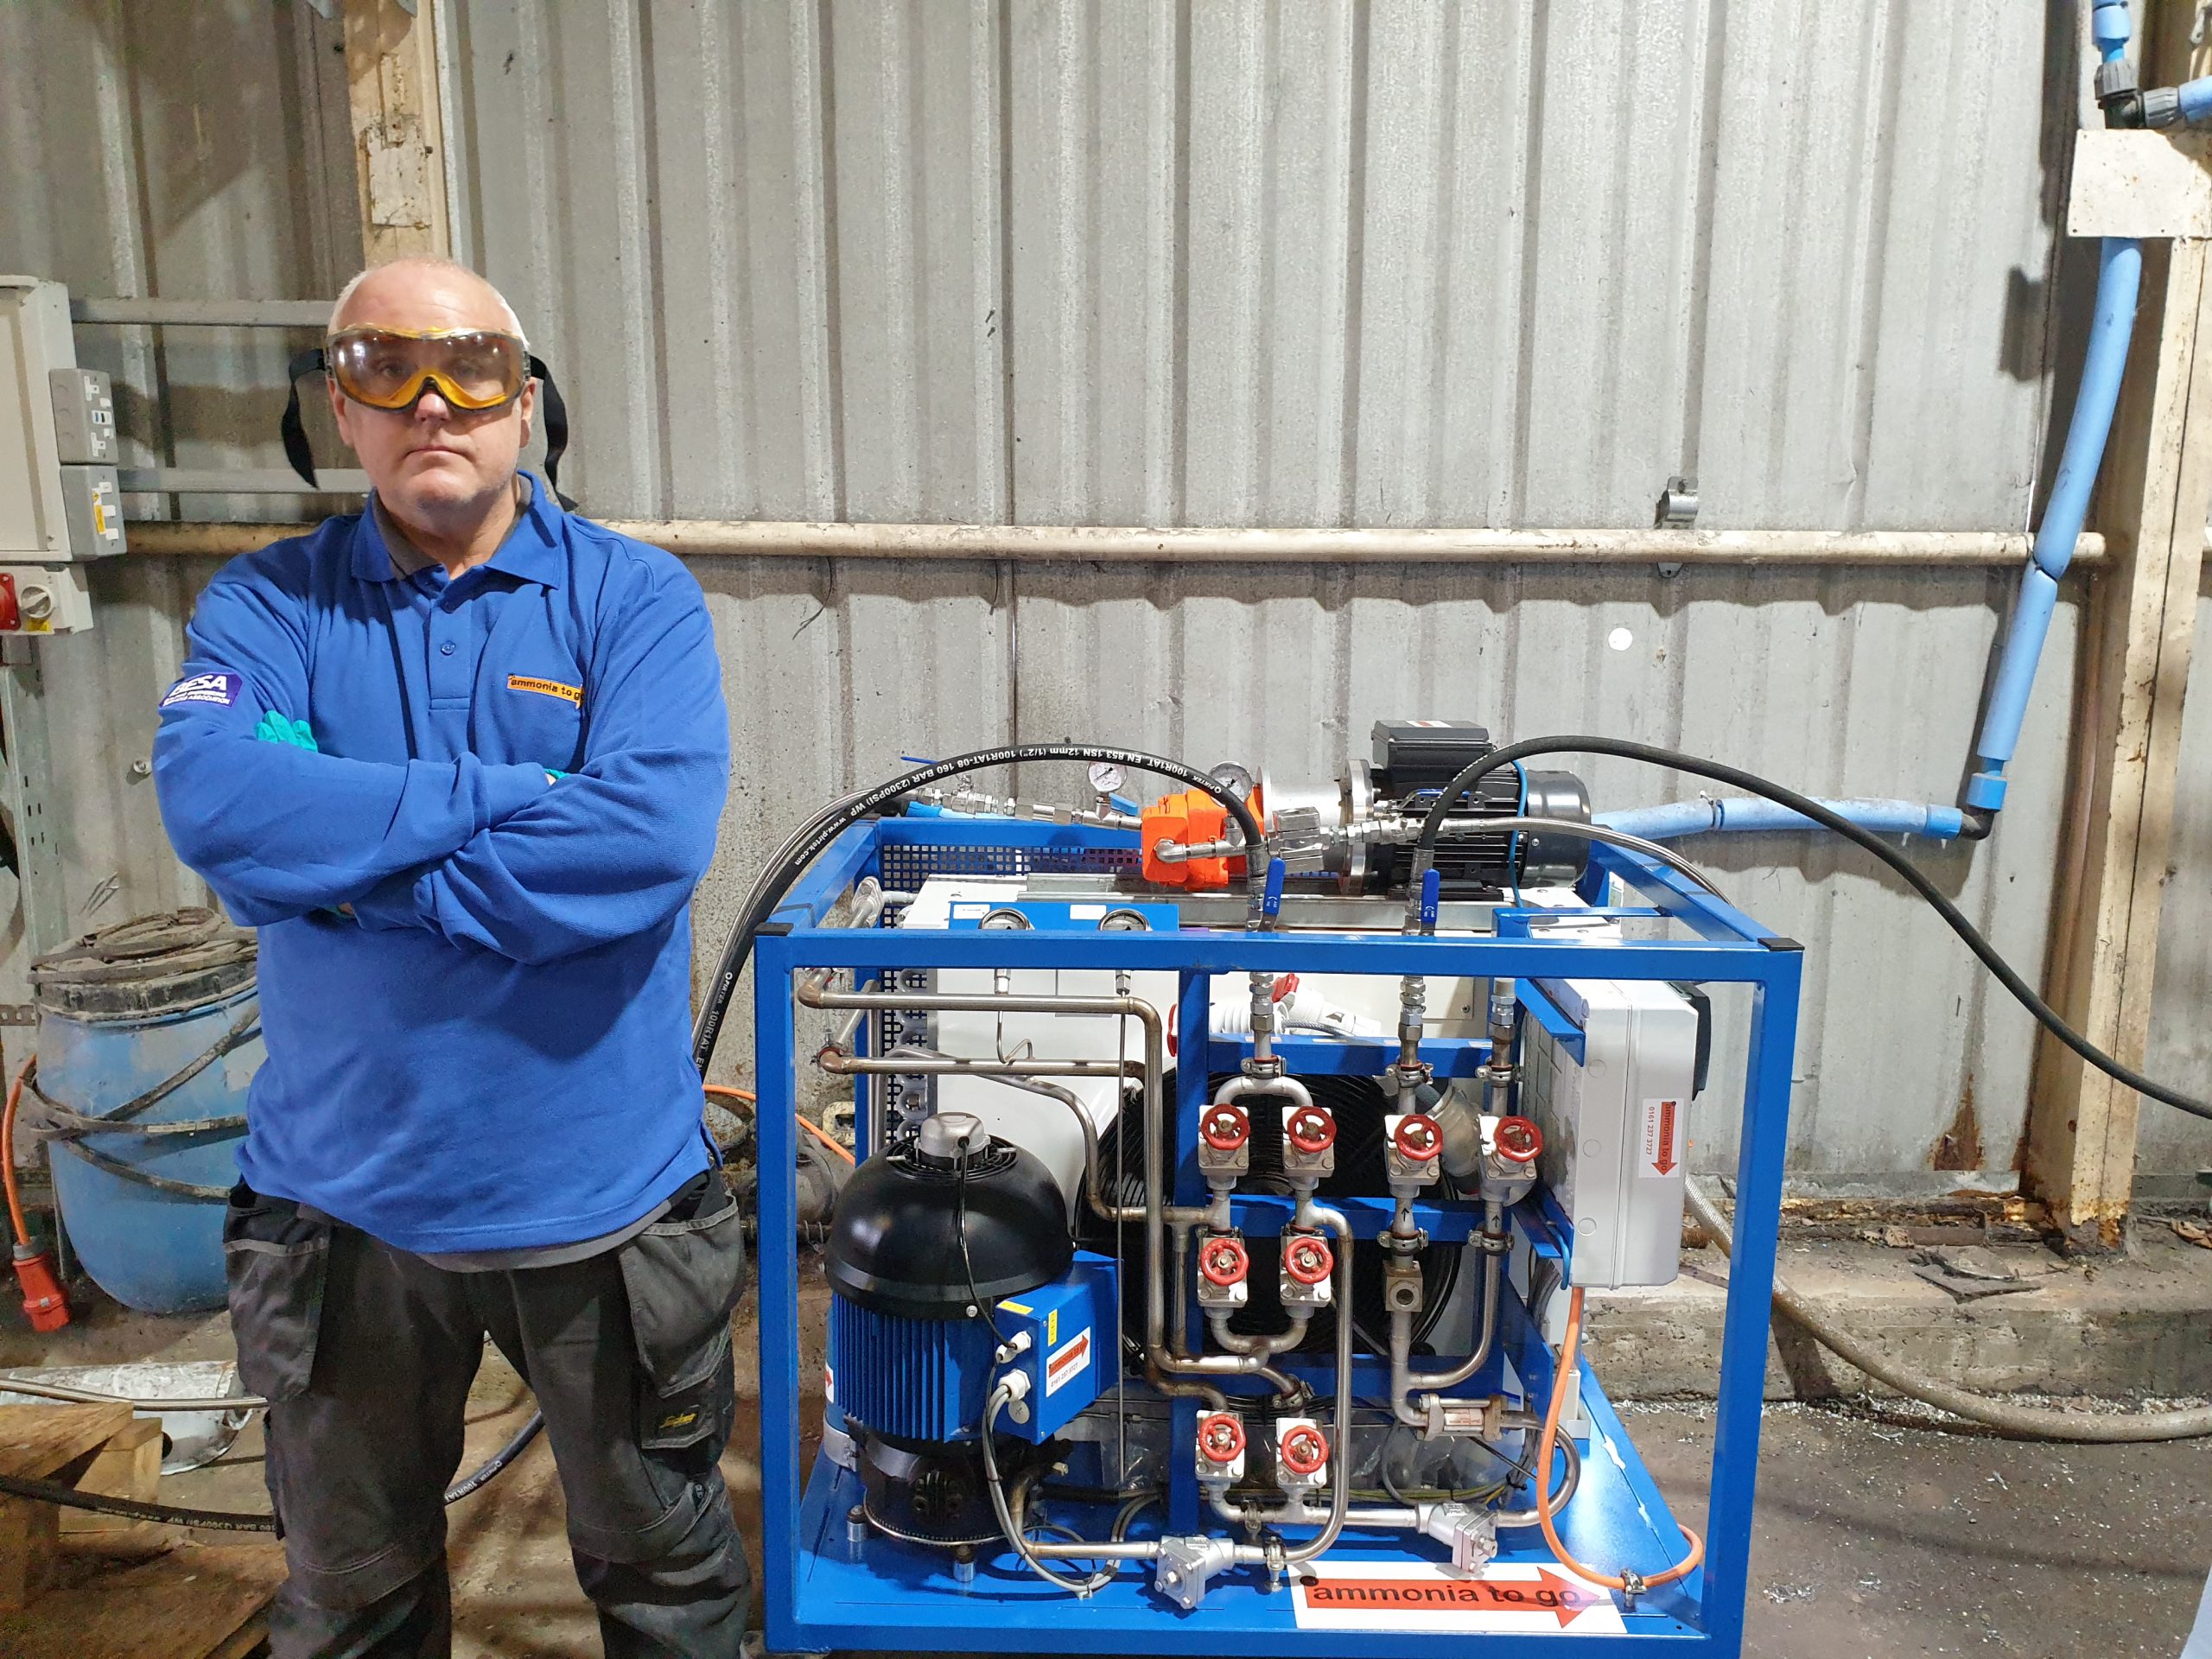 An engineer wearing a blue ammonia to go refrigerant recovery shirt next to a pump out unit